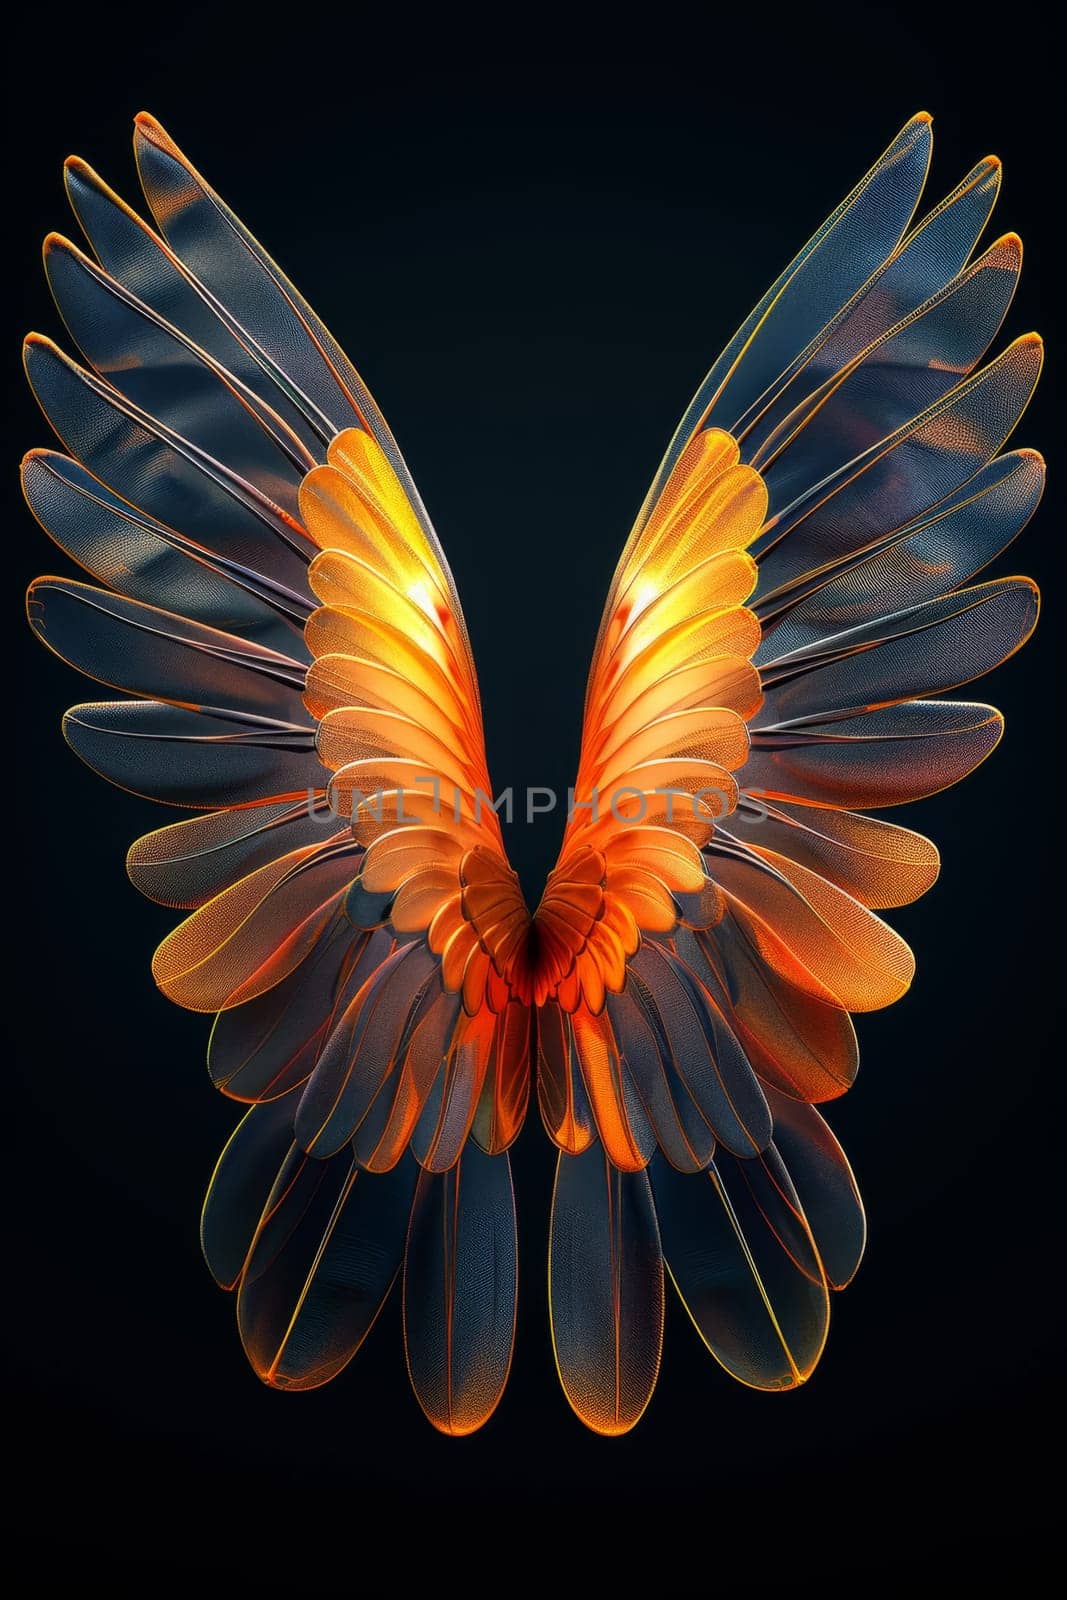 Golden wings on a black background. Illustration by Lobachad